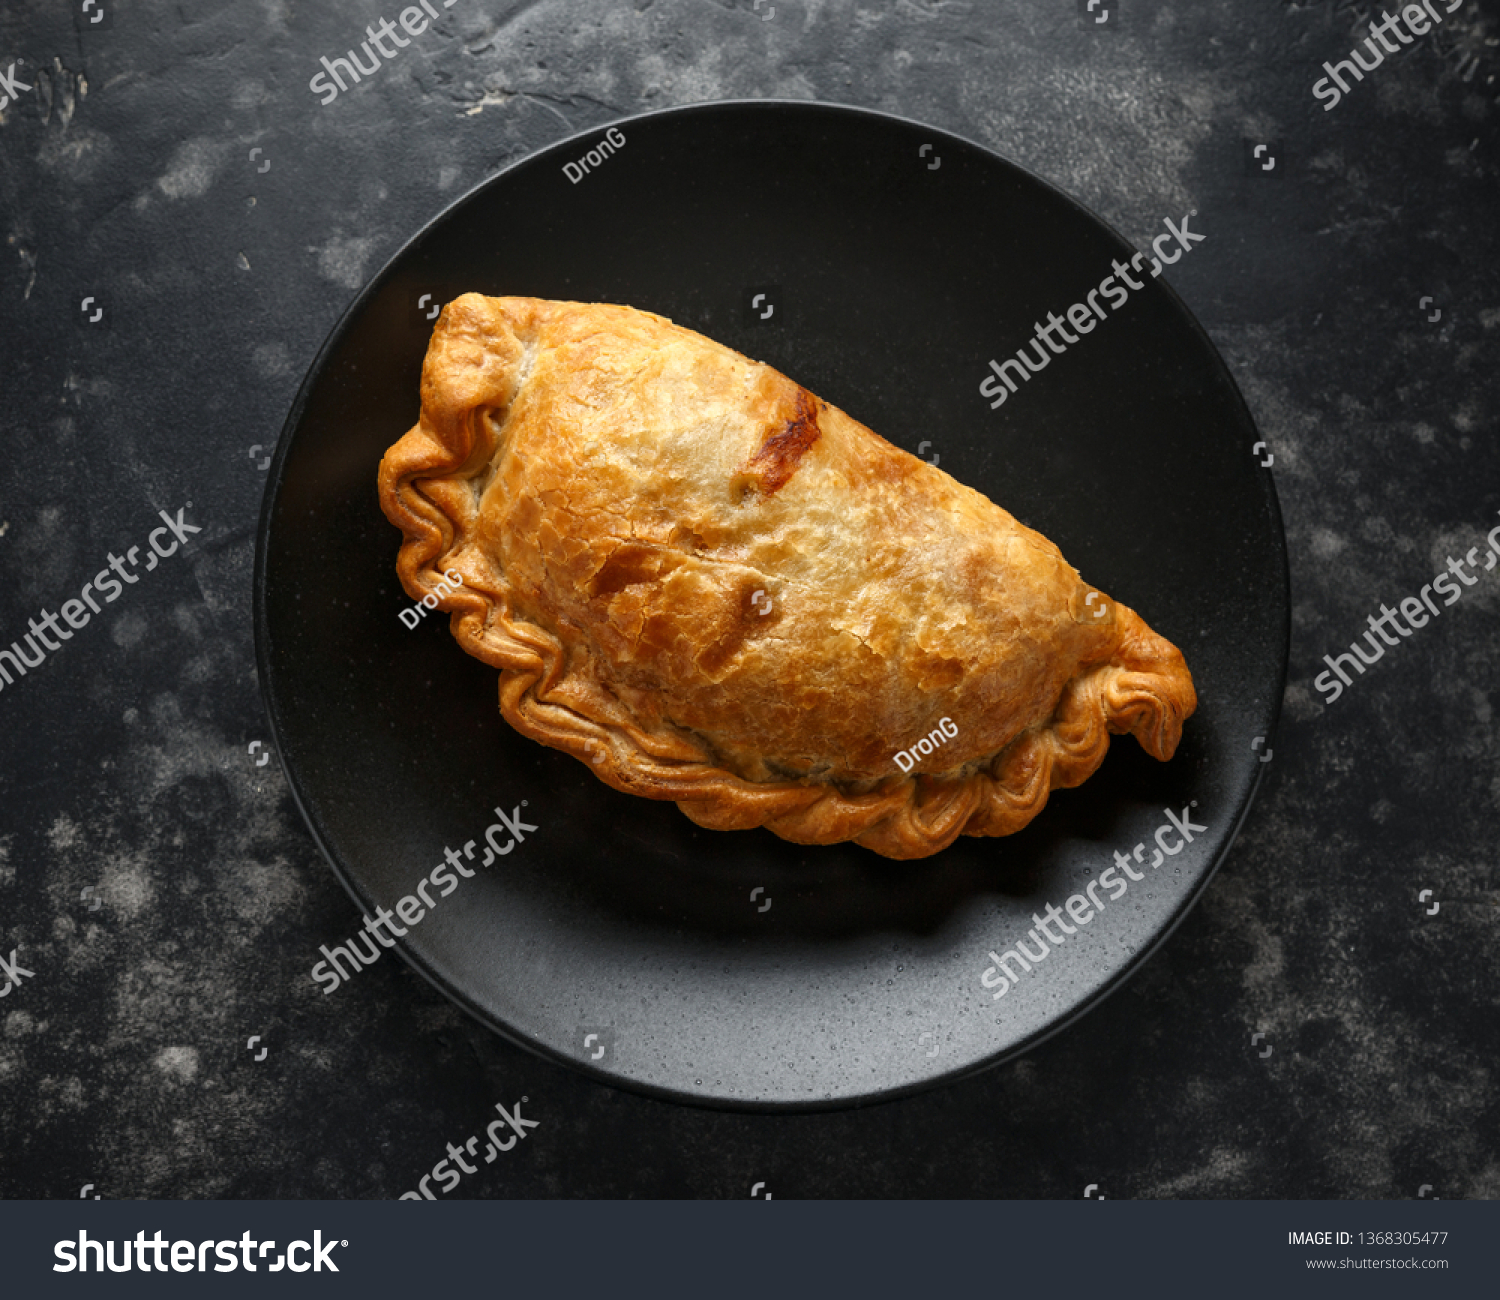 Traditional Cornish pasty filled with beef meat, potato and vegetables on black plate #1368305477